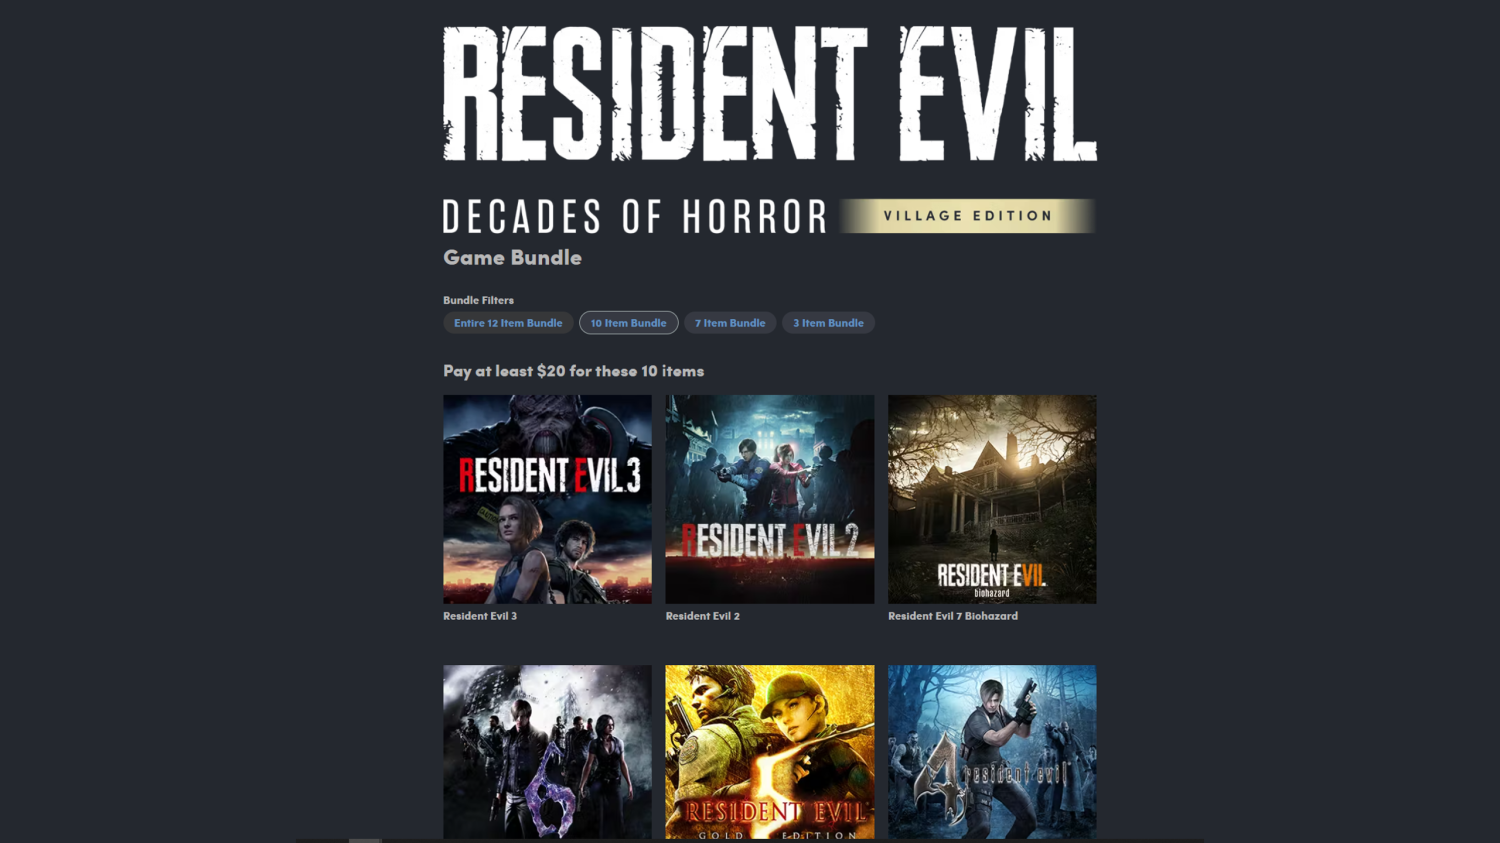 Buy Resident Evil: Revelations 2 Deluxe Edition from the Humble Store